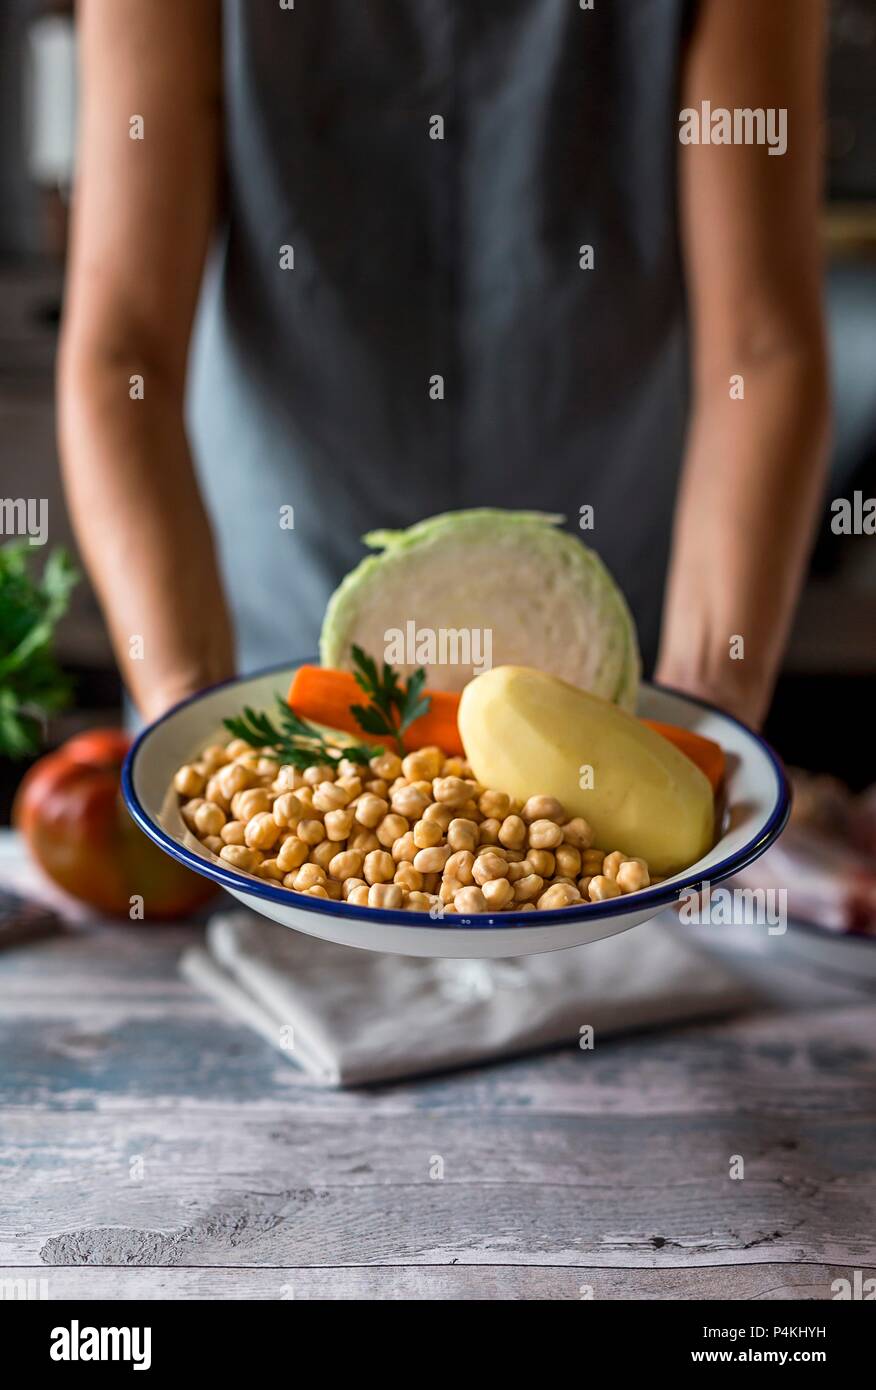 A woman holding a bowl of chickpeas, potatos, carrots and cabbage (ingredients for Cocido madrileno - a Spanish stew) Stock Photo